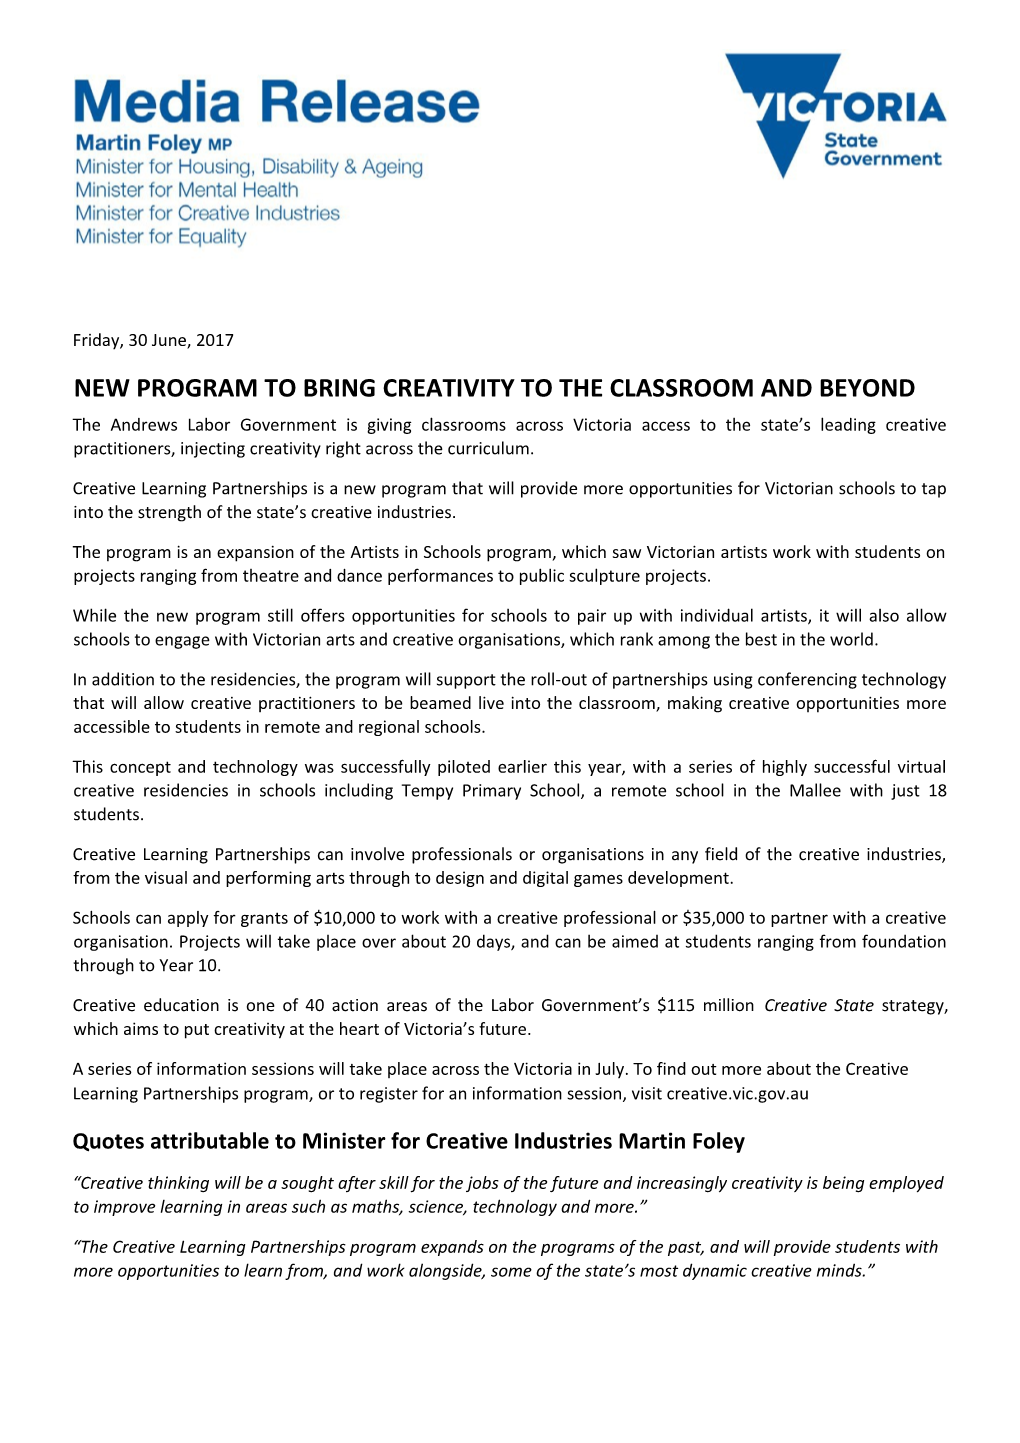 New Program to Bring Creativity to the Classroom and Beyond